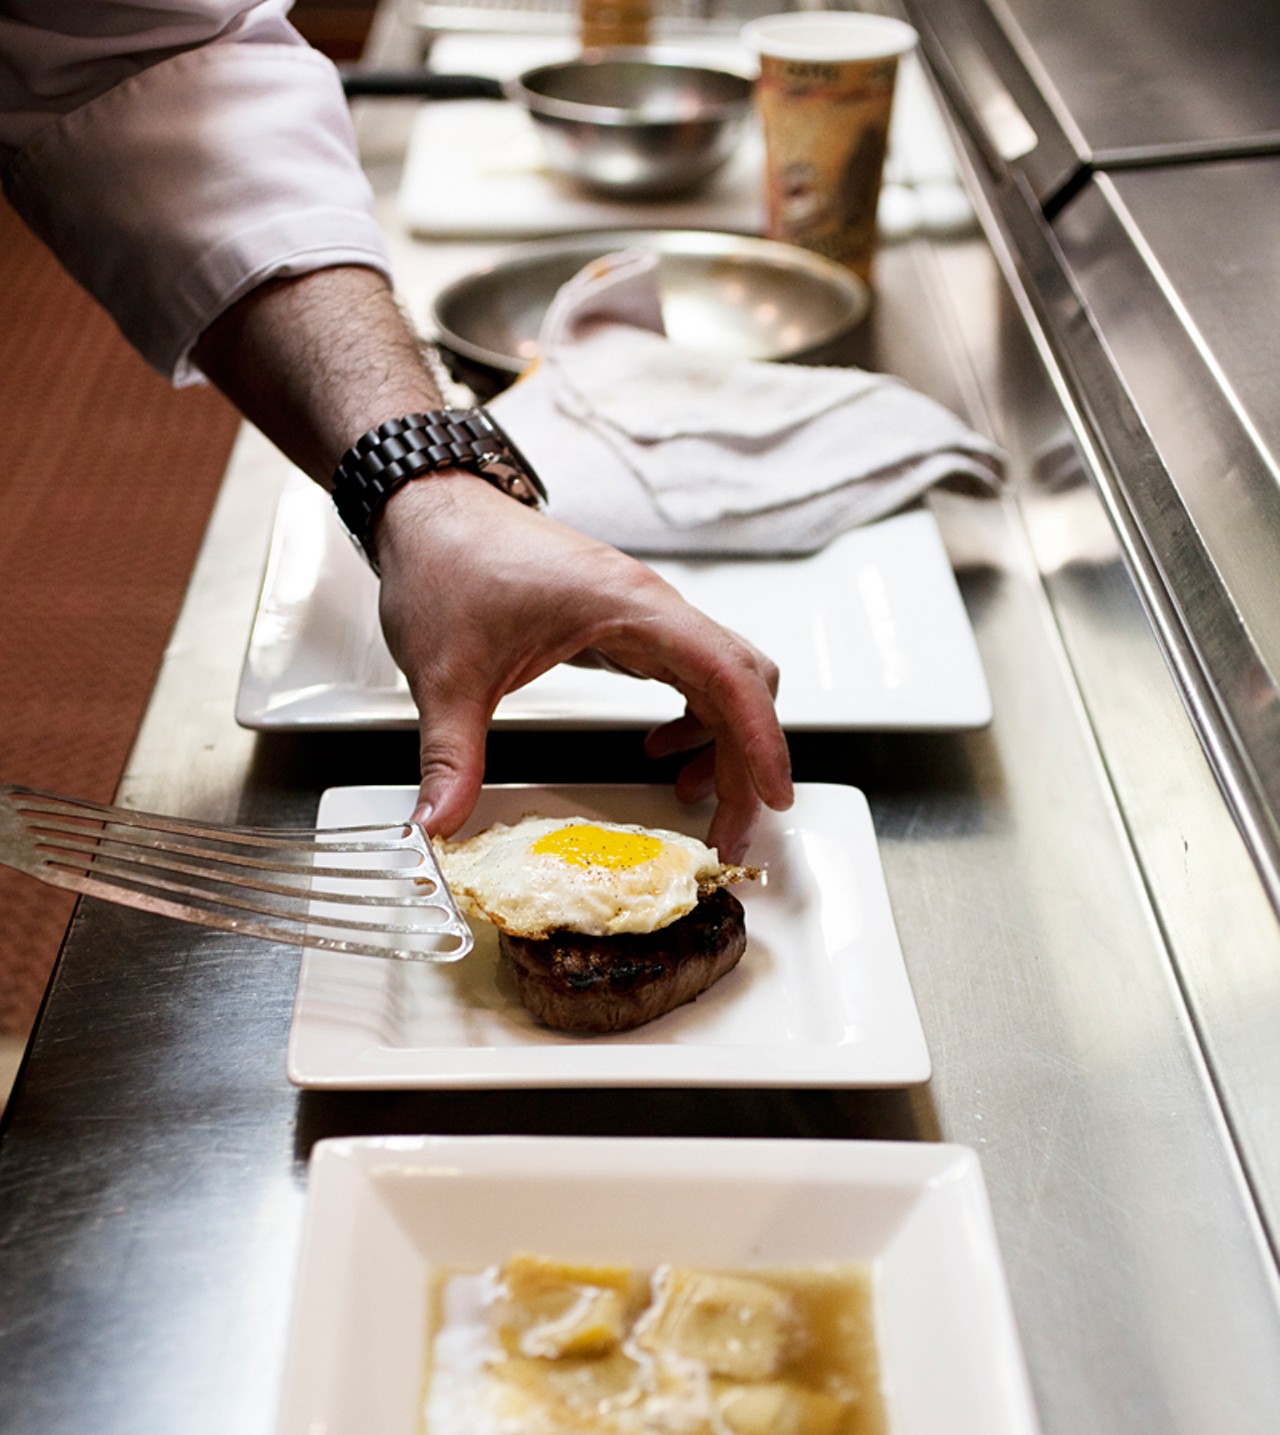 Chef Brad Watts preparing the Steak and Eggs of the day, this particular day featuring a grass-fed tenderloin.